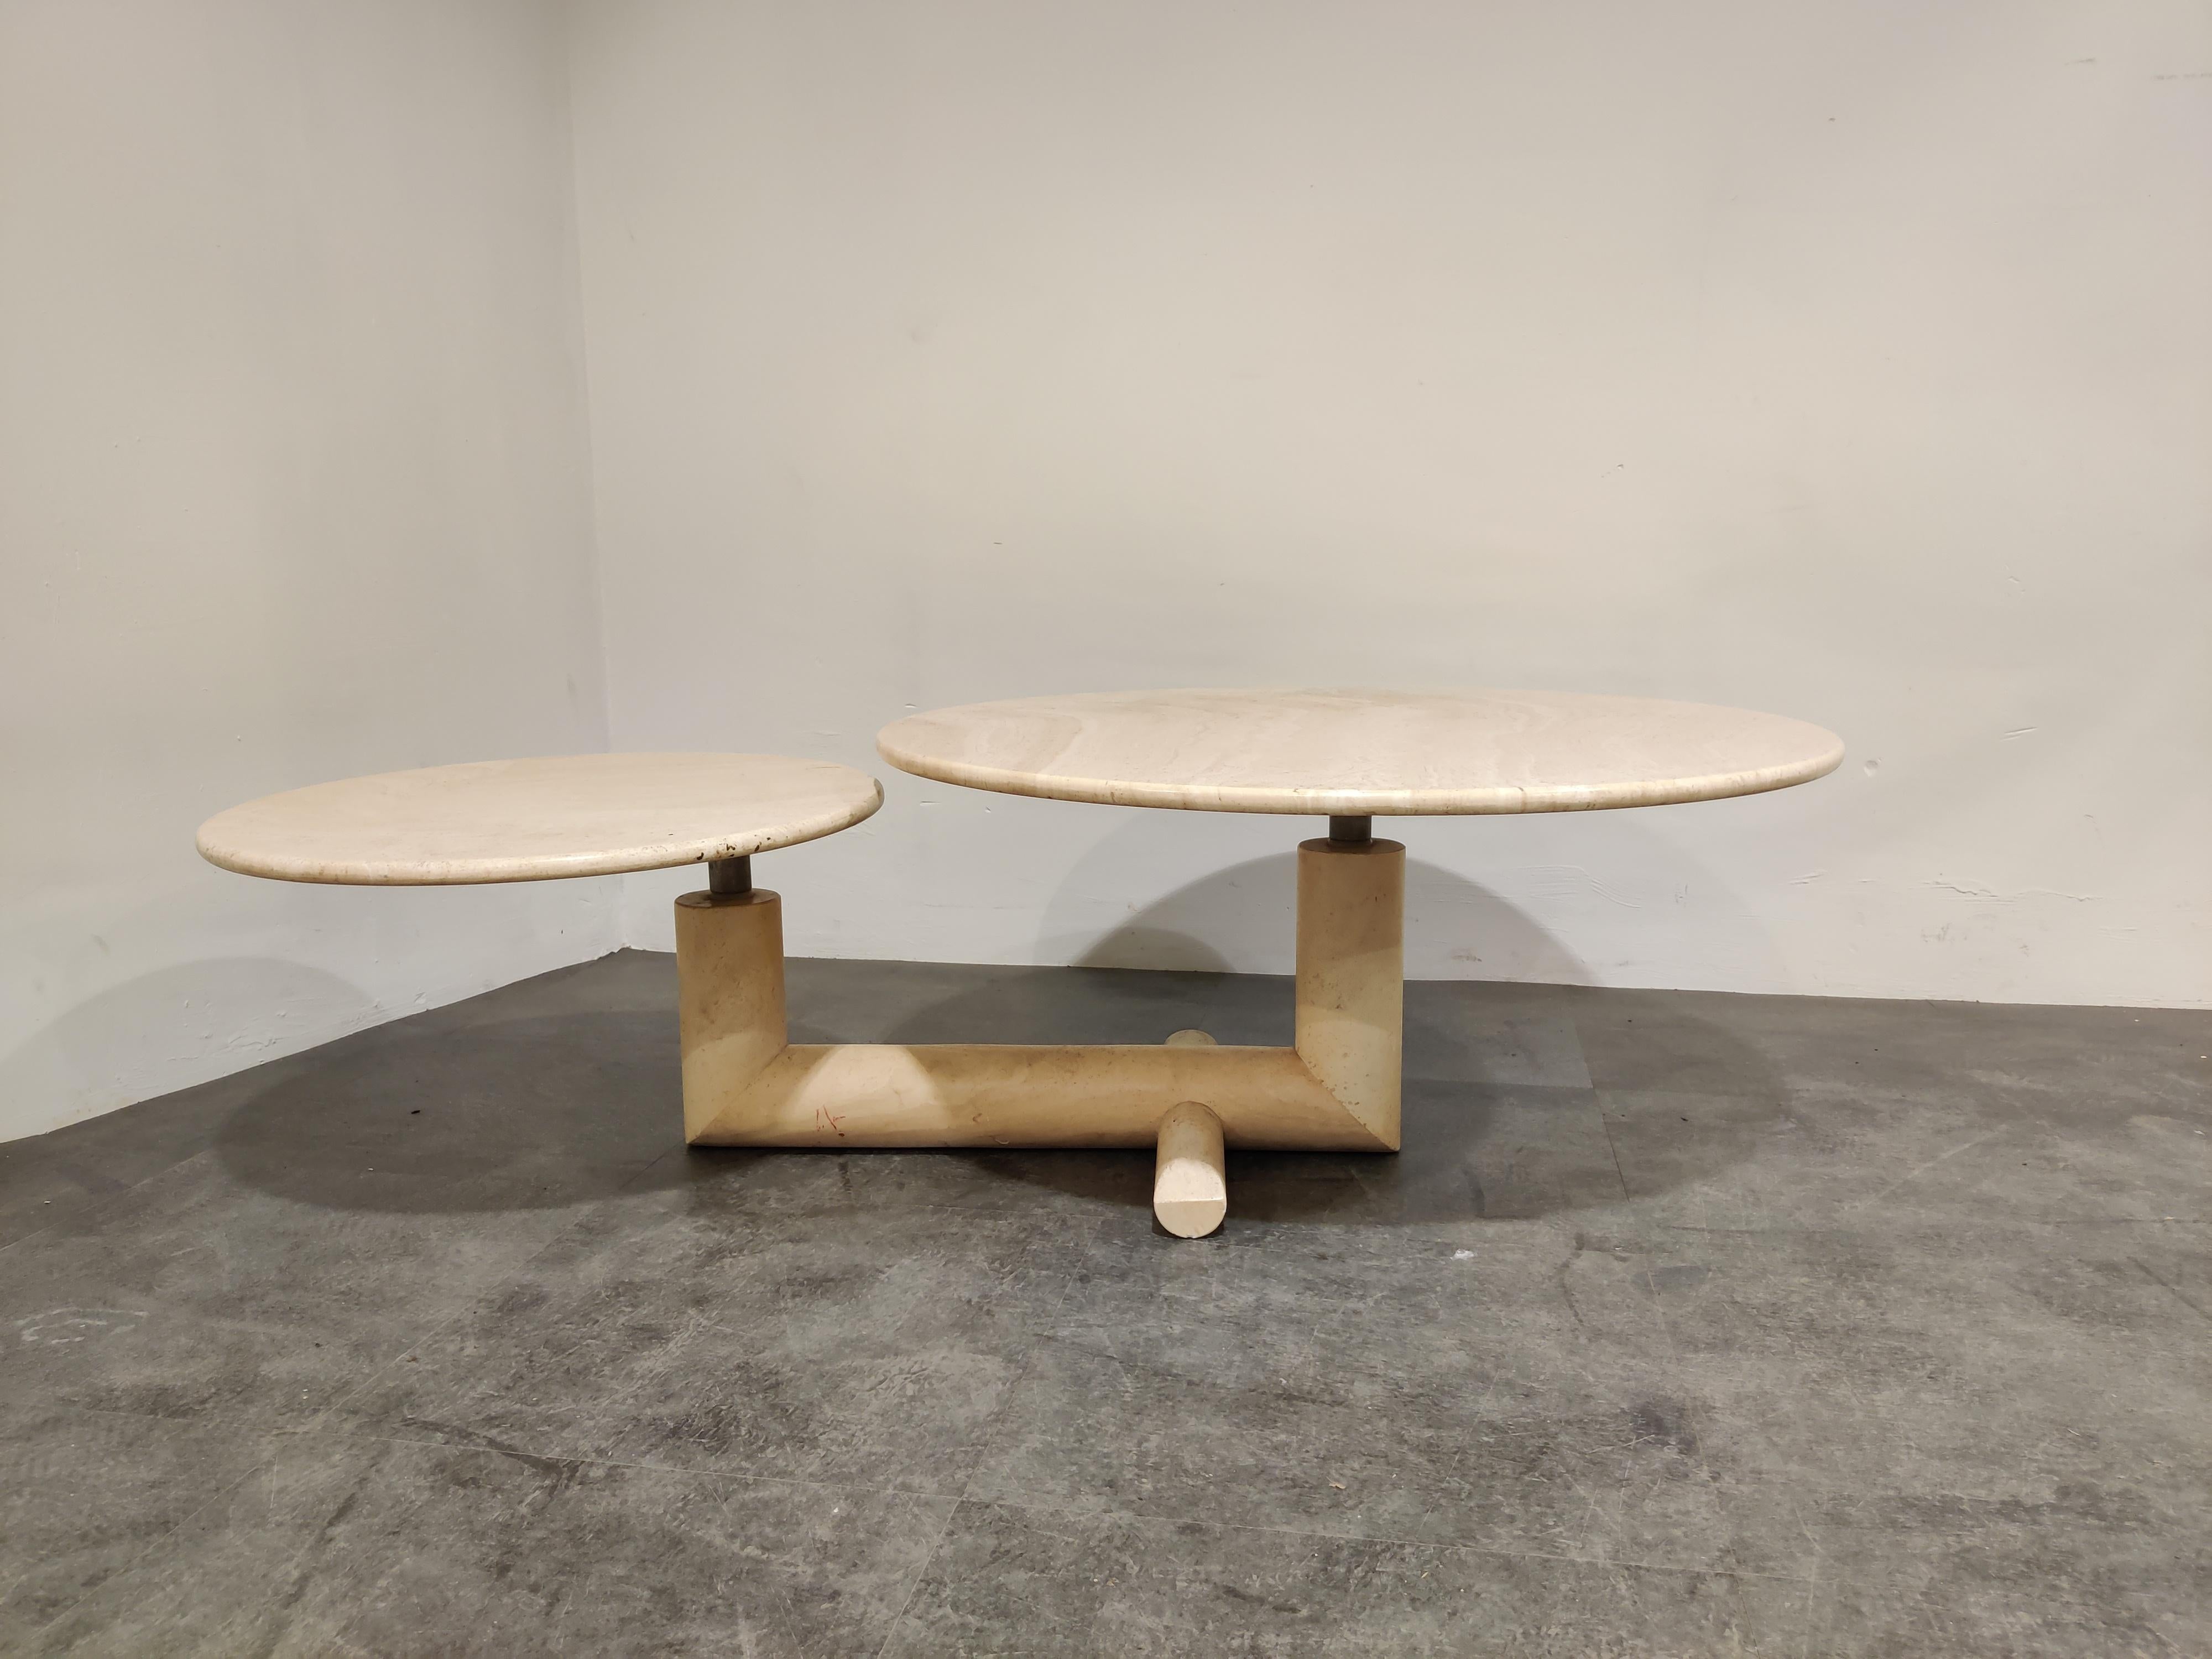 Rare travertine coffee tables with two pivotating round tops.

Unique tubular travertine base.

Good condition.

1970s - Italy

Dimensions:
Height: 41cm/16.14